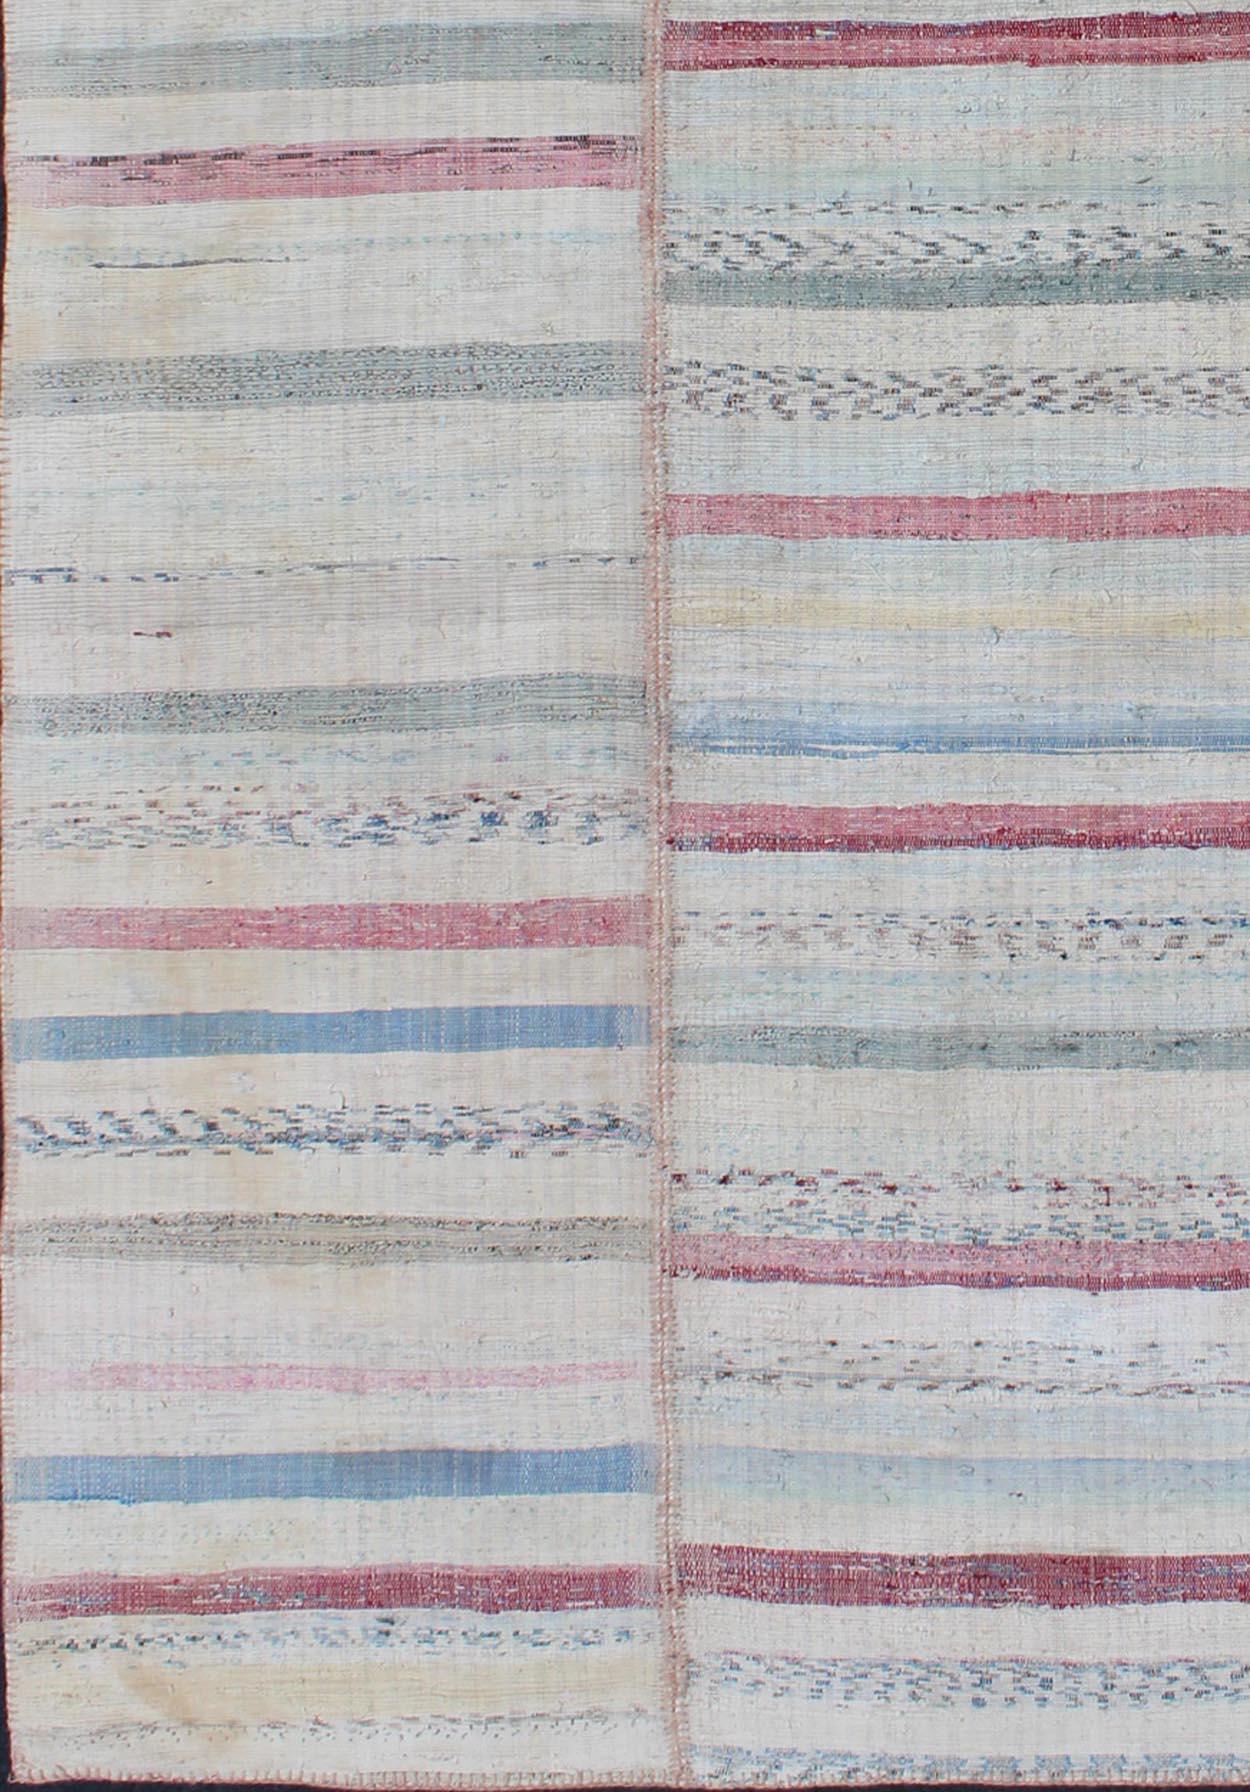 Multi-Panel Vintage Turkish Flat Weave Rug in Pink, Blue, Green and Cream

This multi-paneled, striped Kilim is an example of Provincial minimalism that has conformed to a more modern design. Individual panels are woven together to  accentuate the